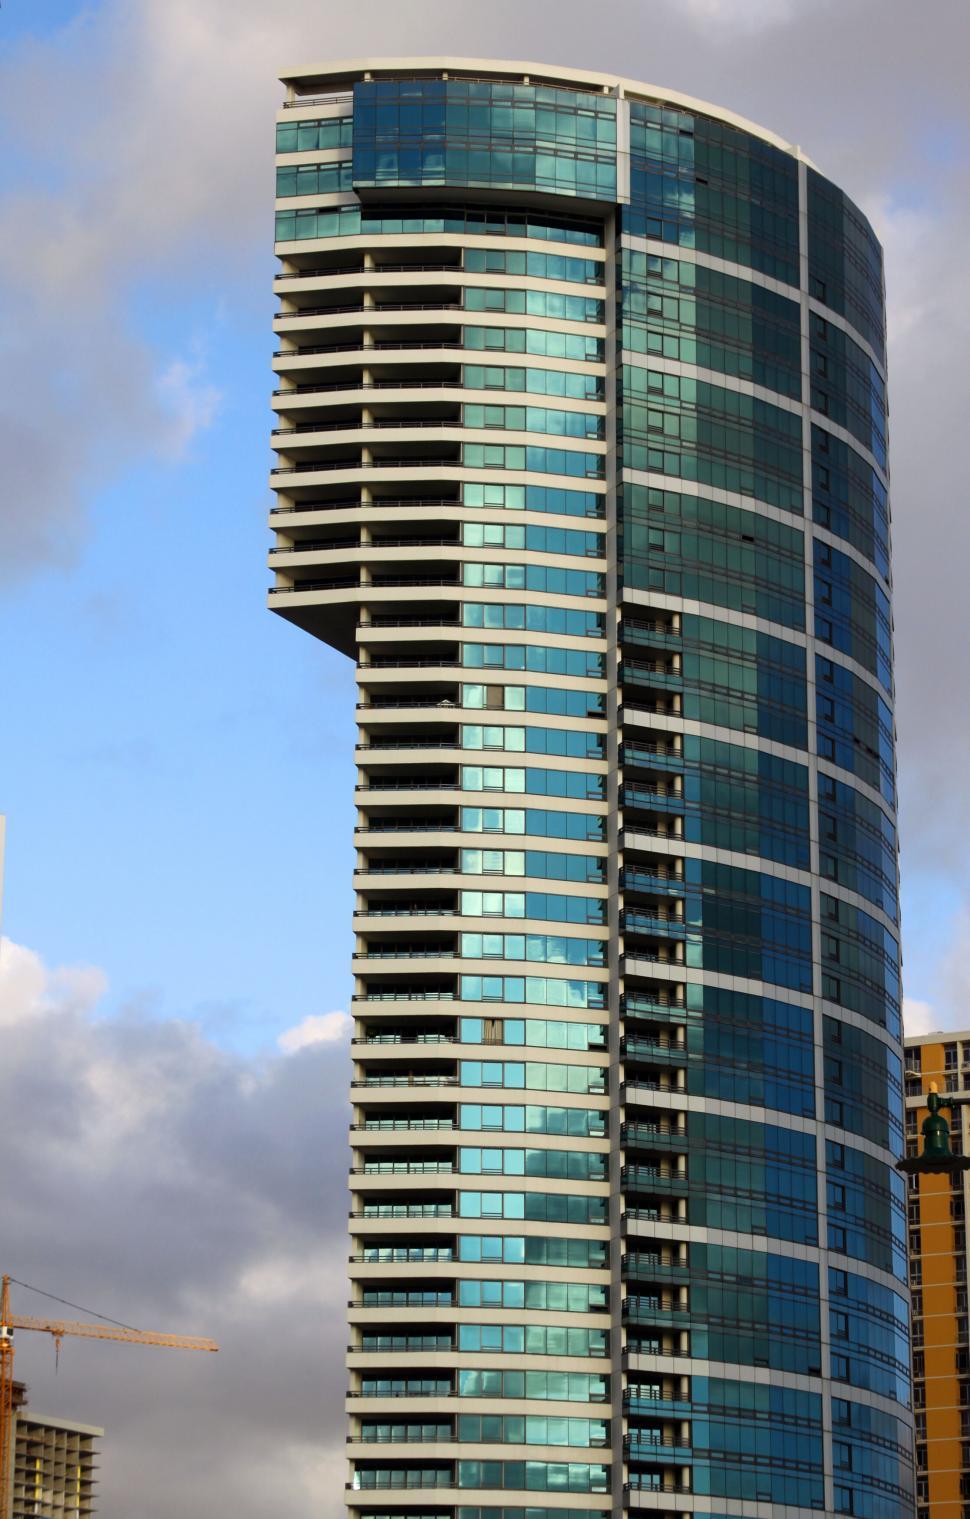 Free Image of Curved High-Rise Building against Cloudy Sky 